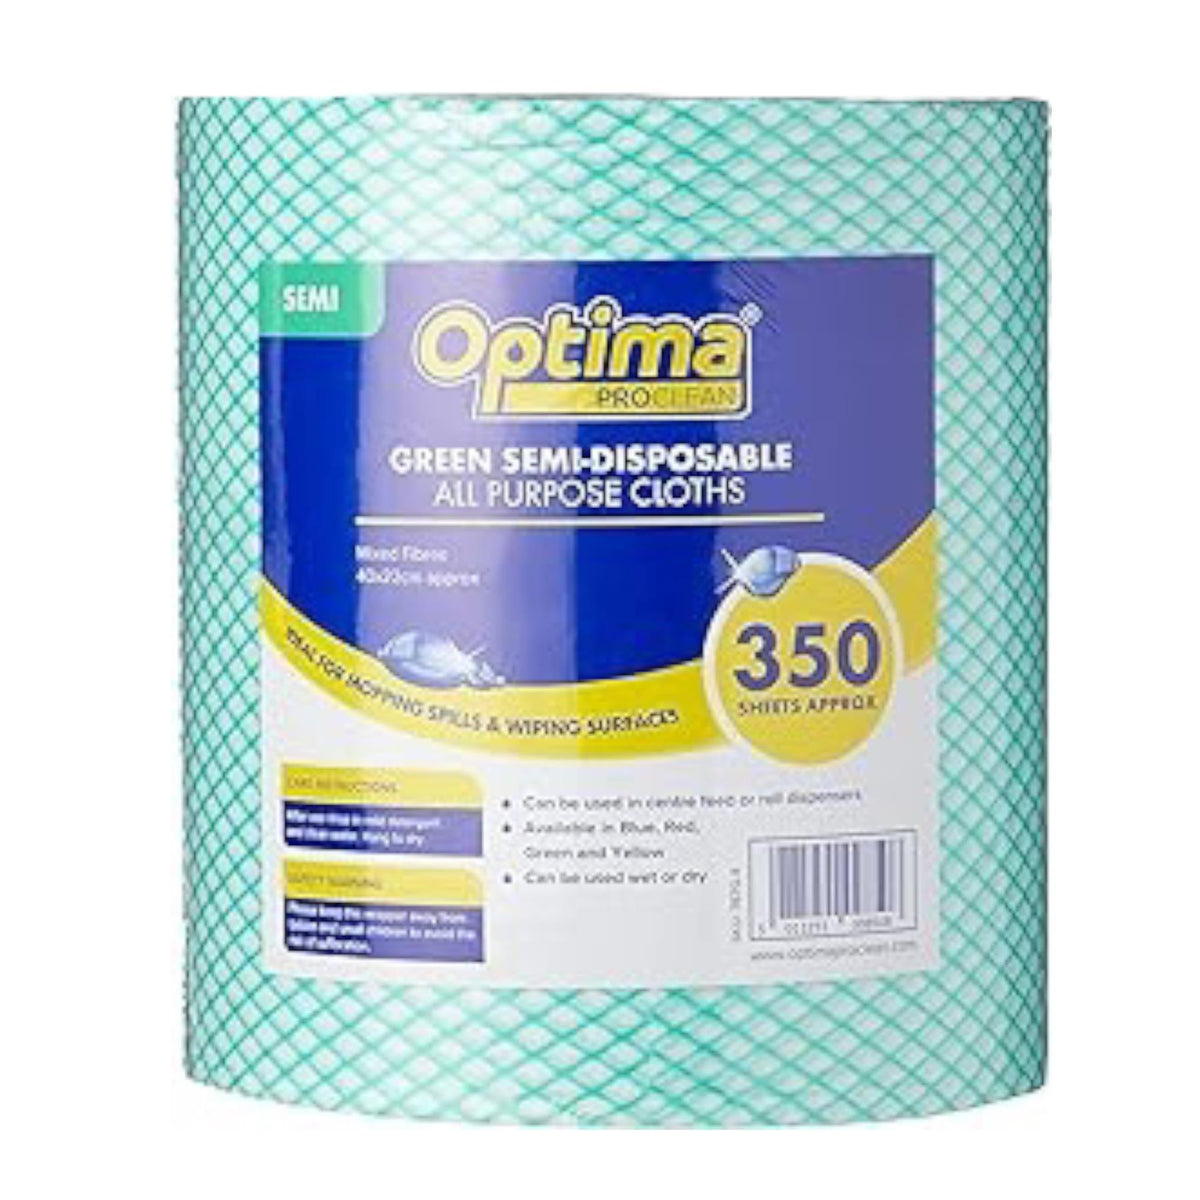 Optima Proclean Lightweight All Purpose Cleaning Cloths 350 Green